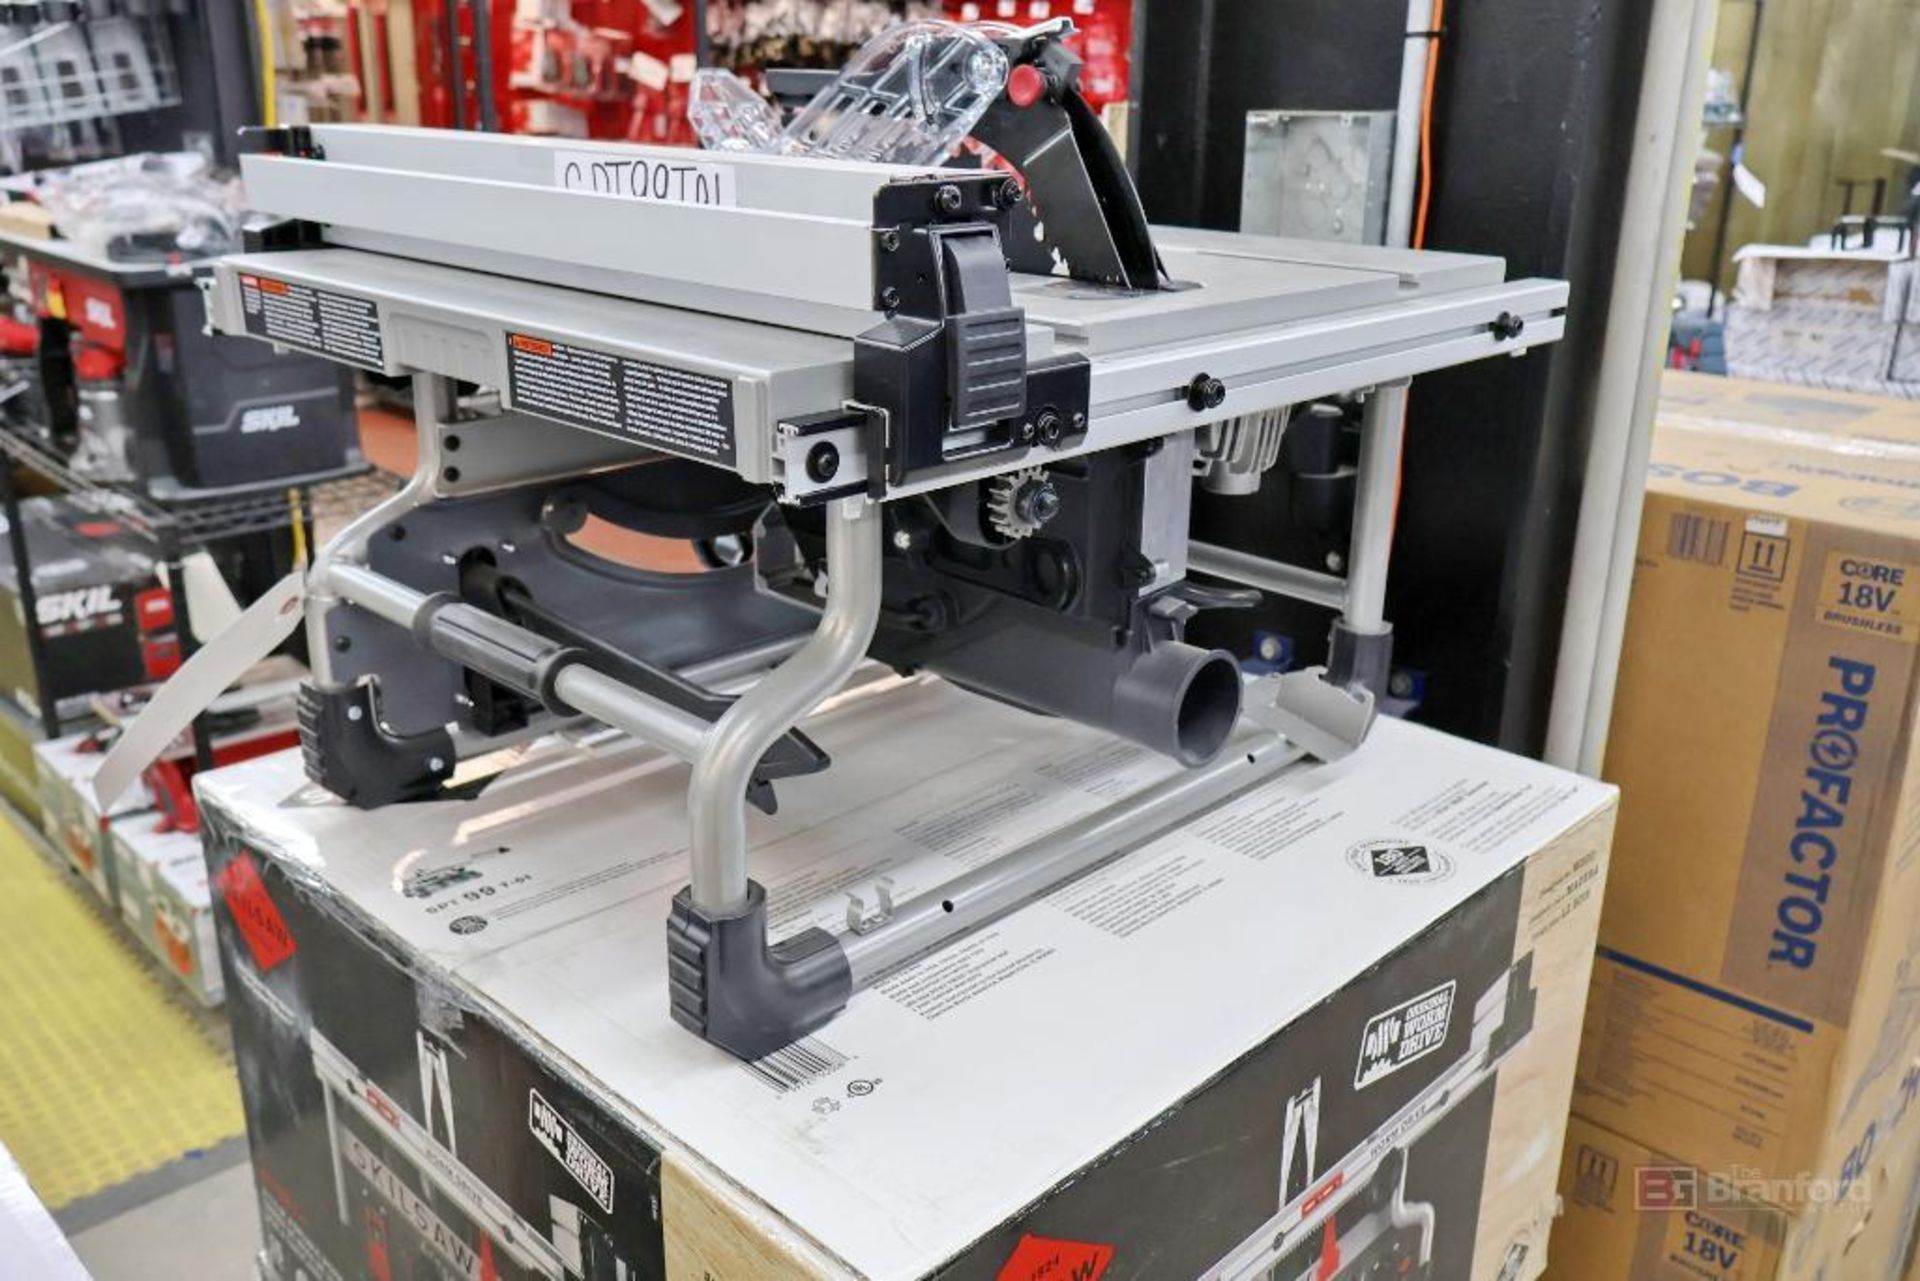 SKILSAW SPT 99 T-01 Portable Worm Drive Table Saw - Image 7 of 8